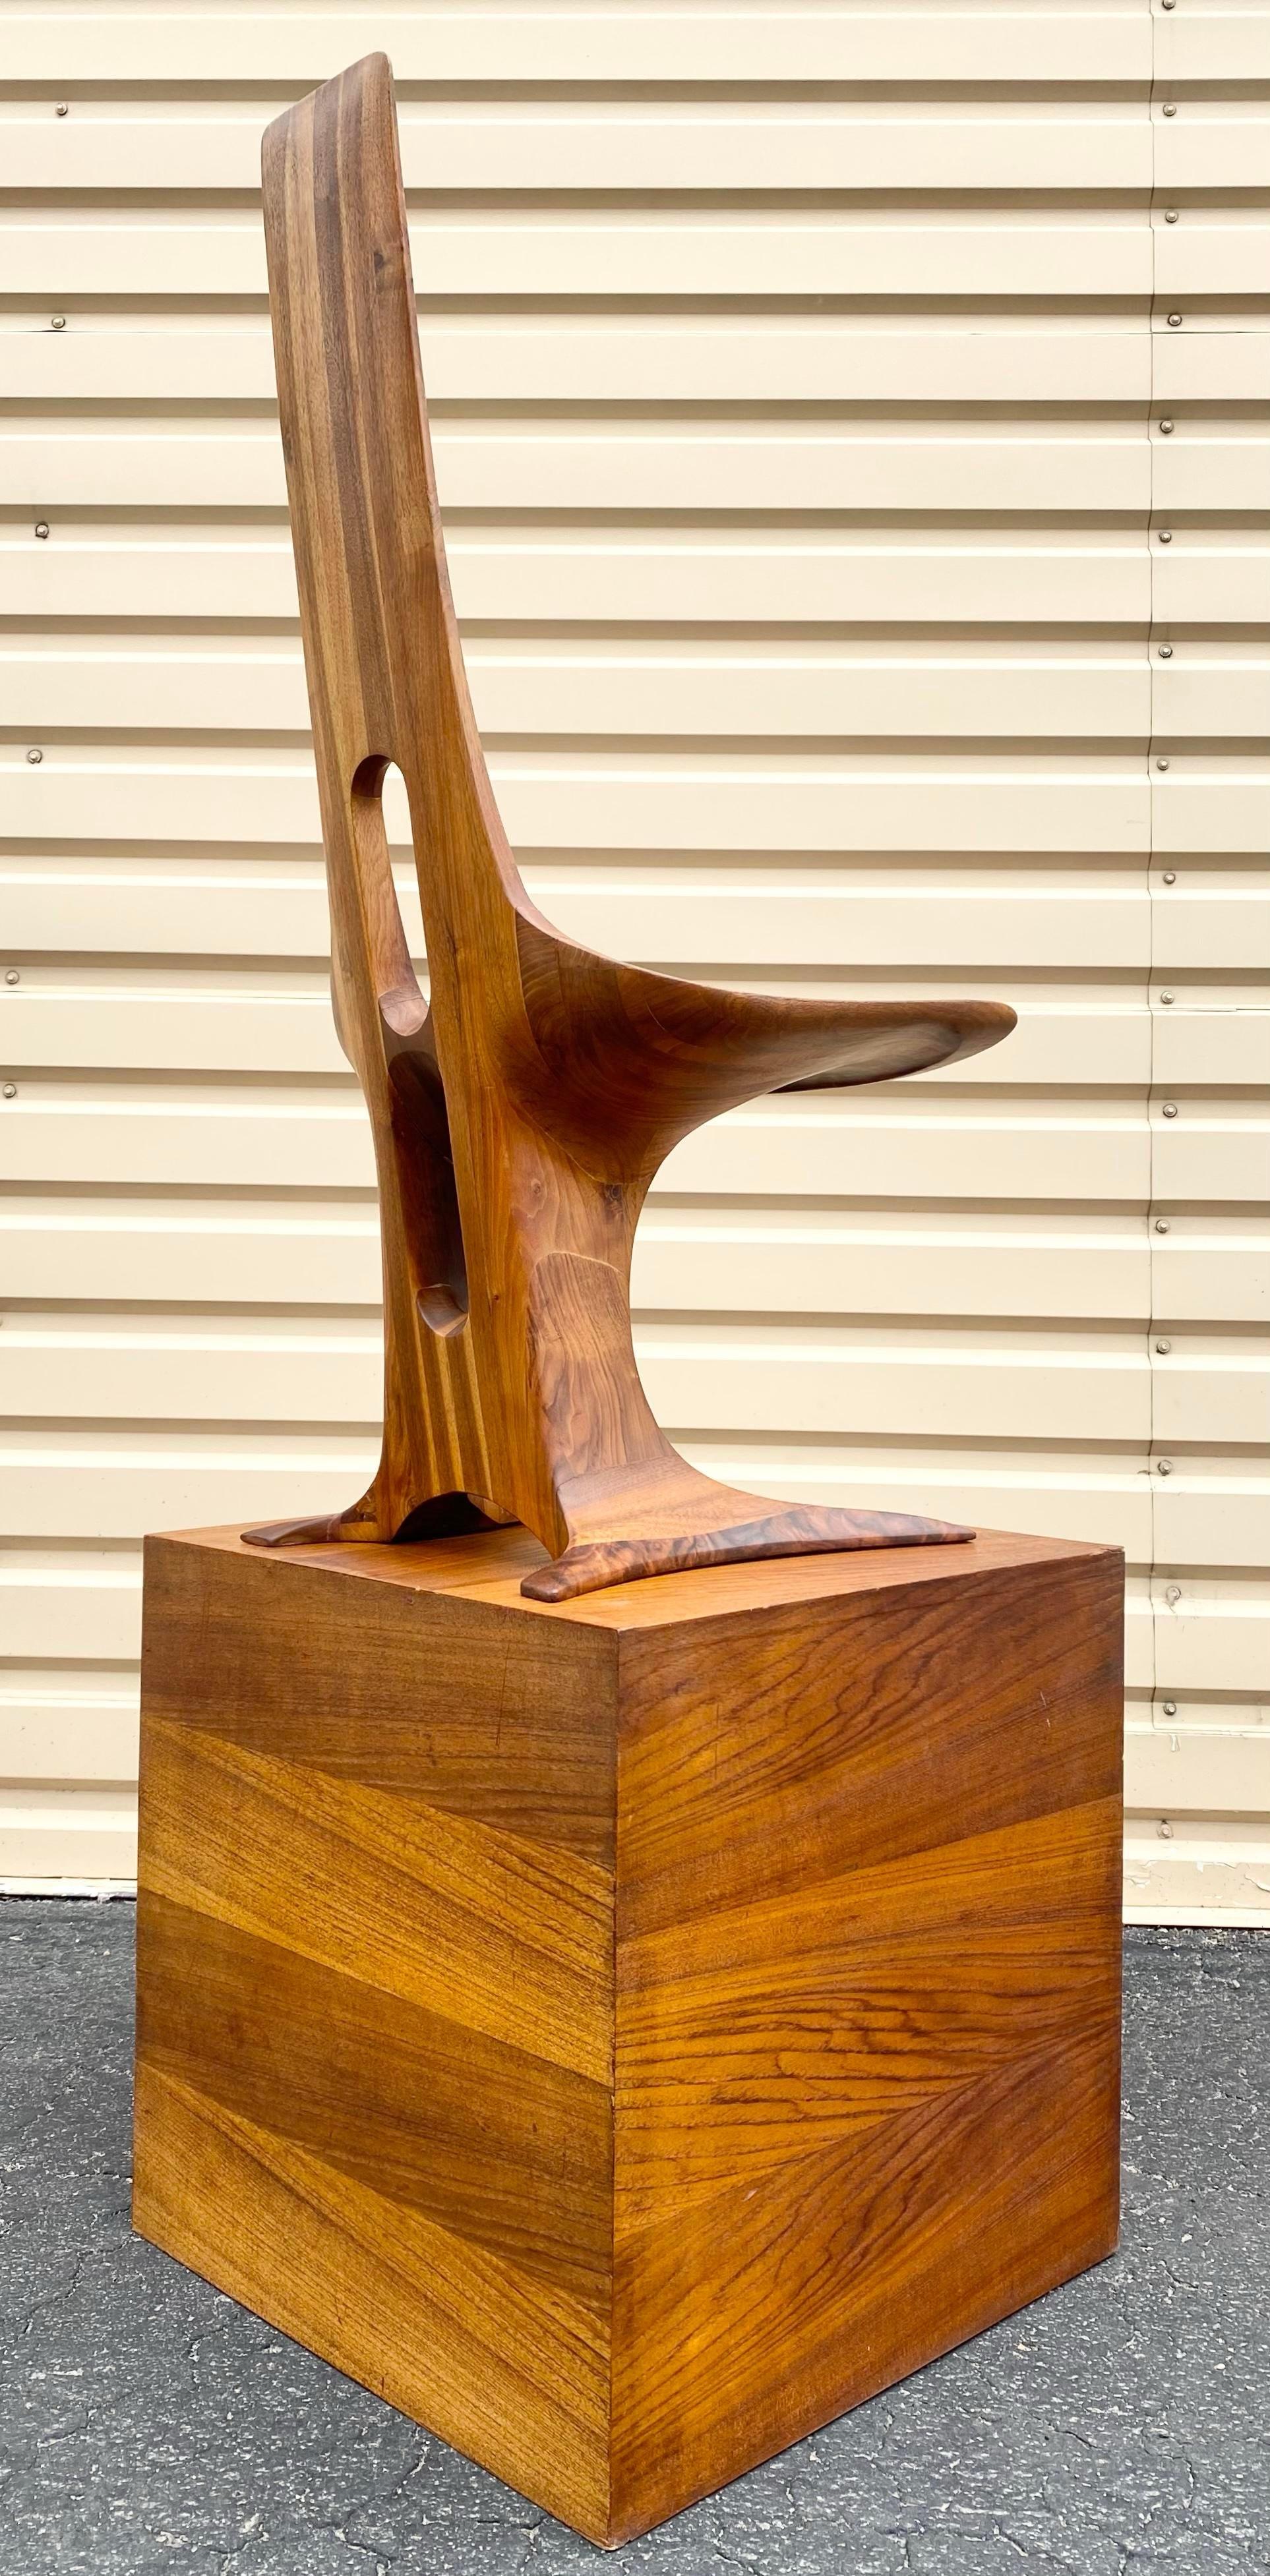 Modernist Sculptural Walnut Chair by Edward G. Livingston for Archotypo (1970) For Sale 6